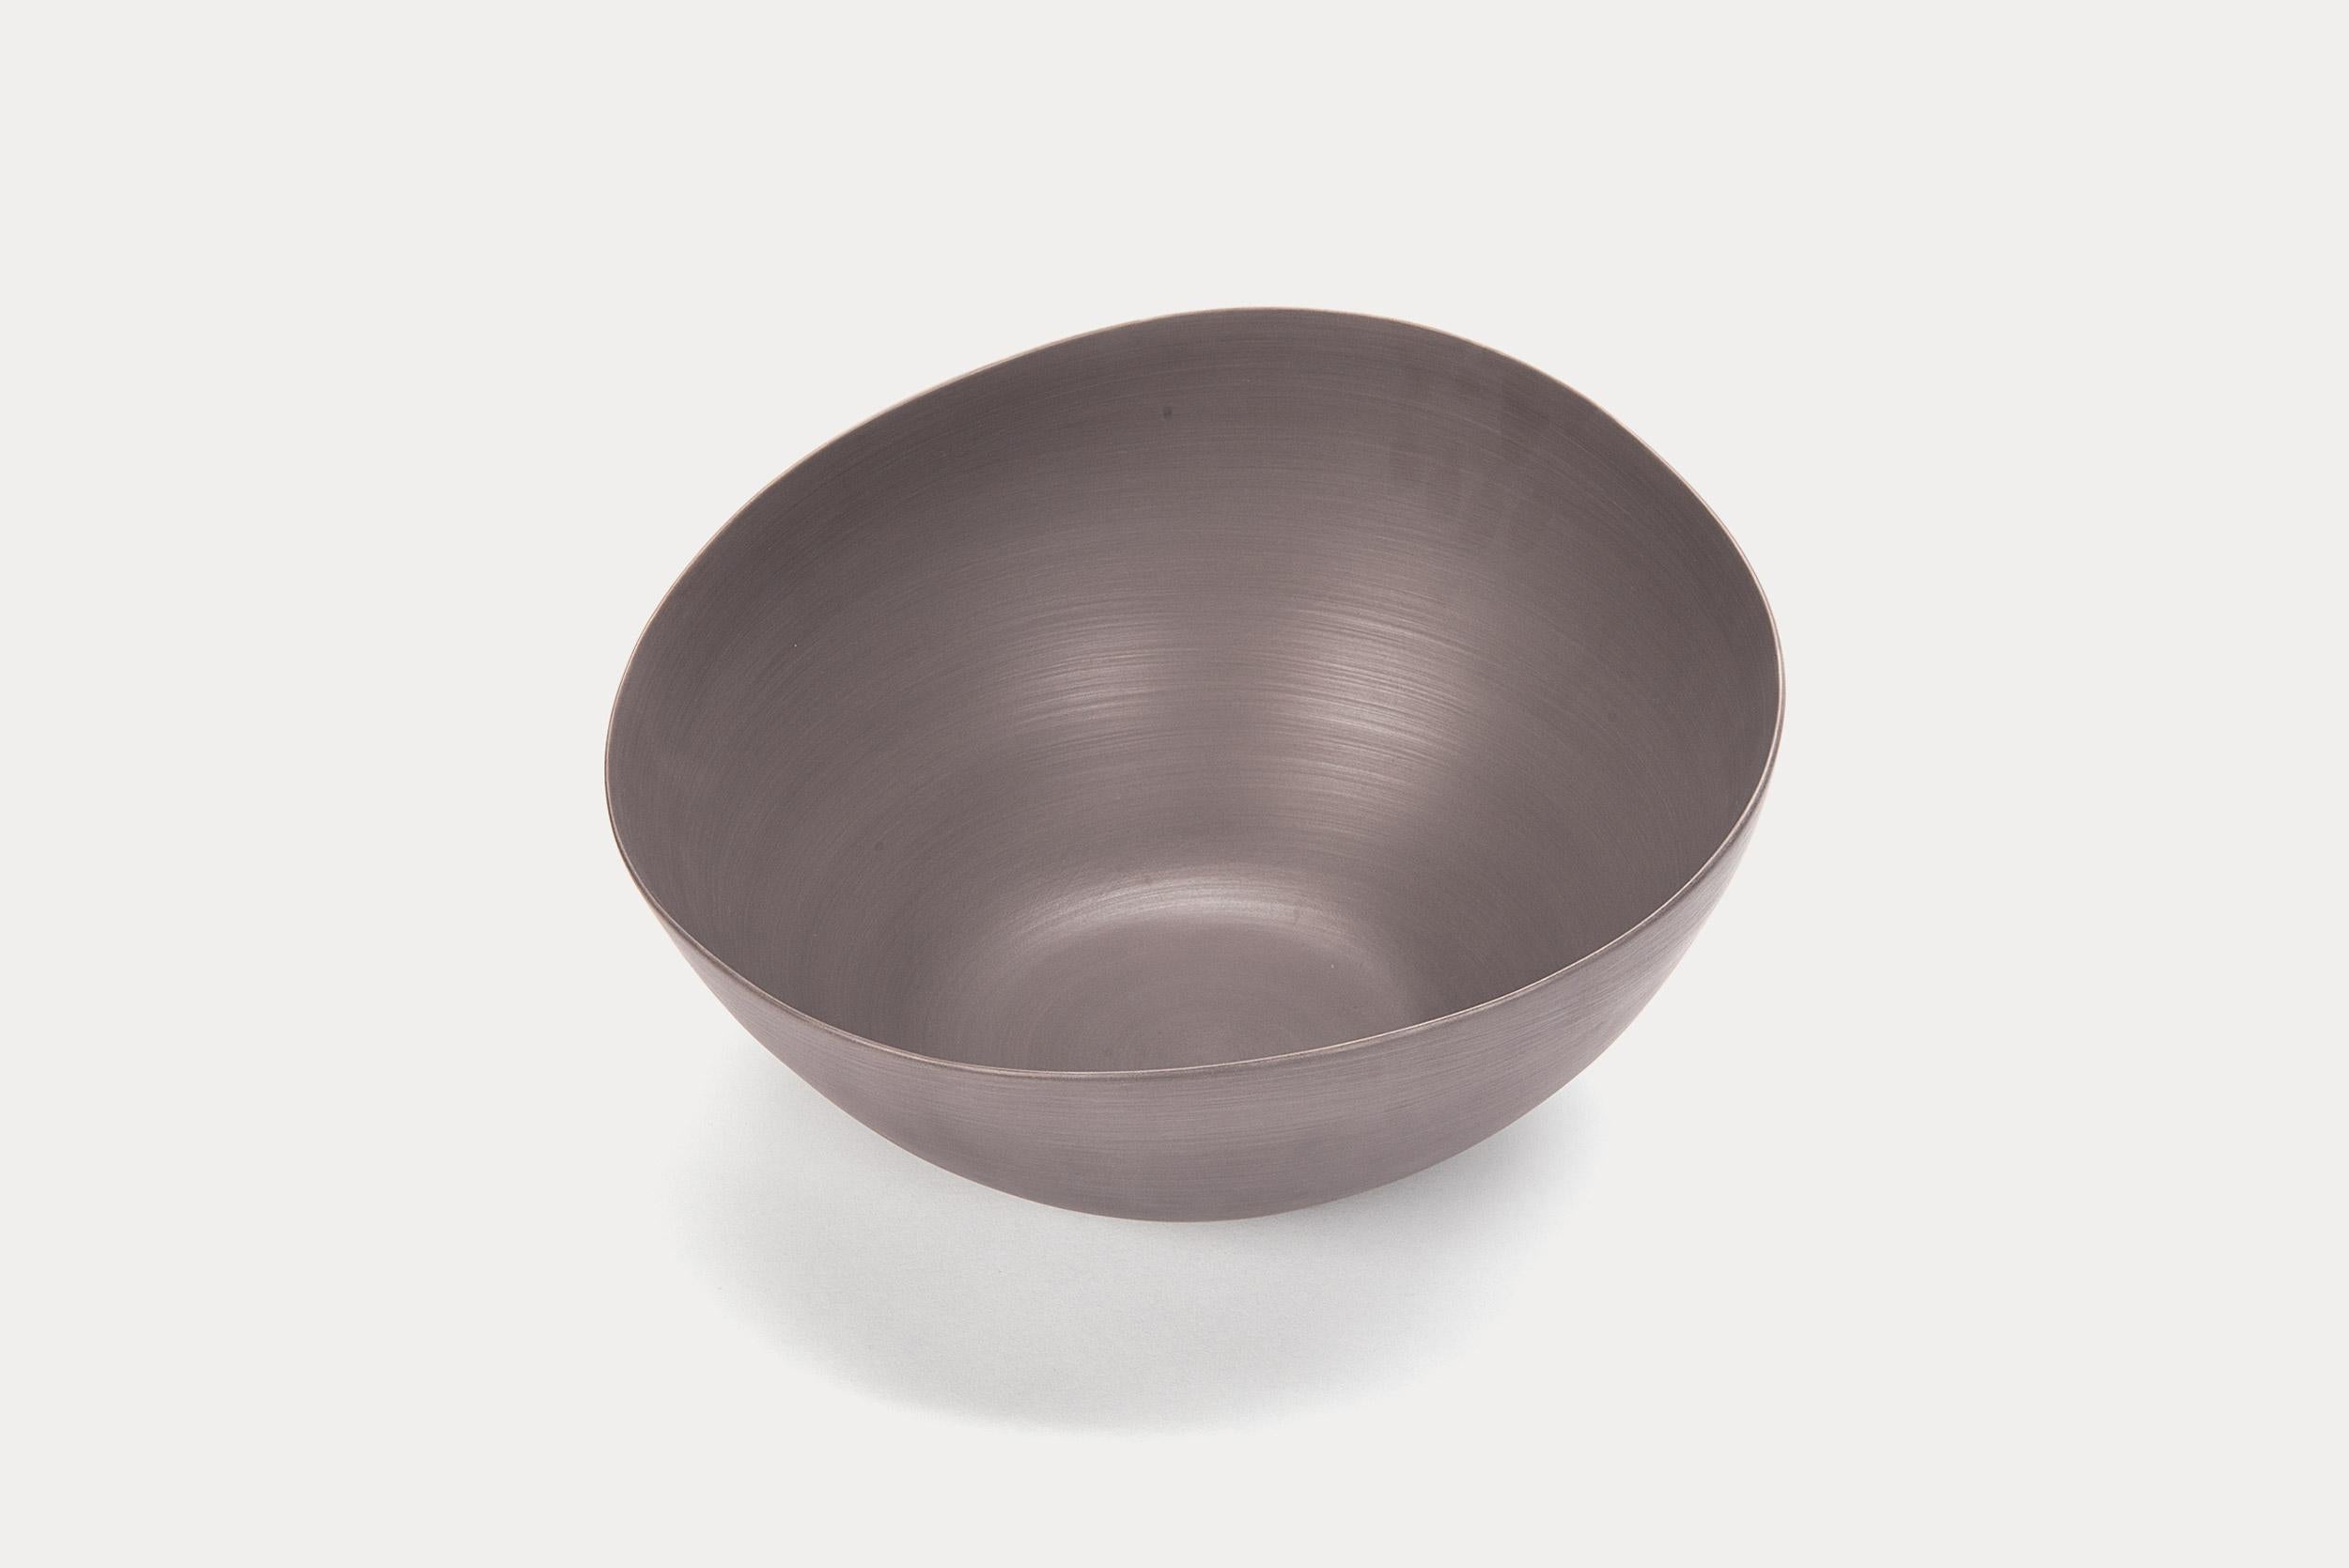 This bowl exhibits the simple, handcrafted lines of Rina Menardi ceramnics. The dark indigo hue would mix beautifully in any home.